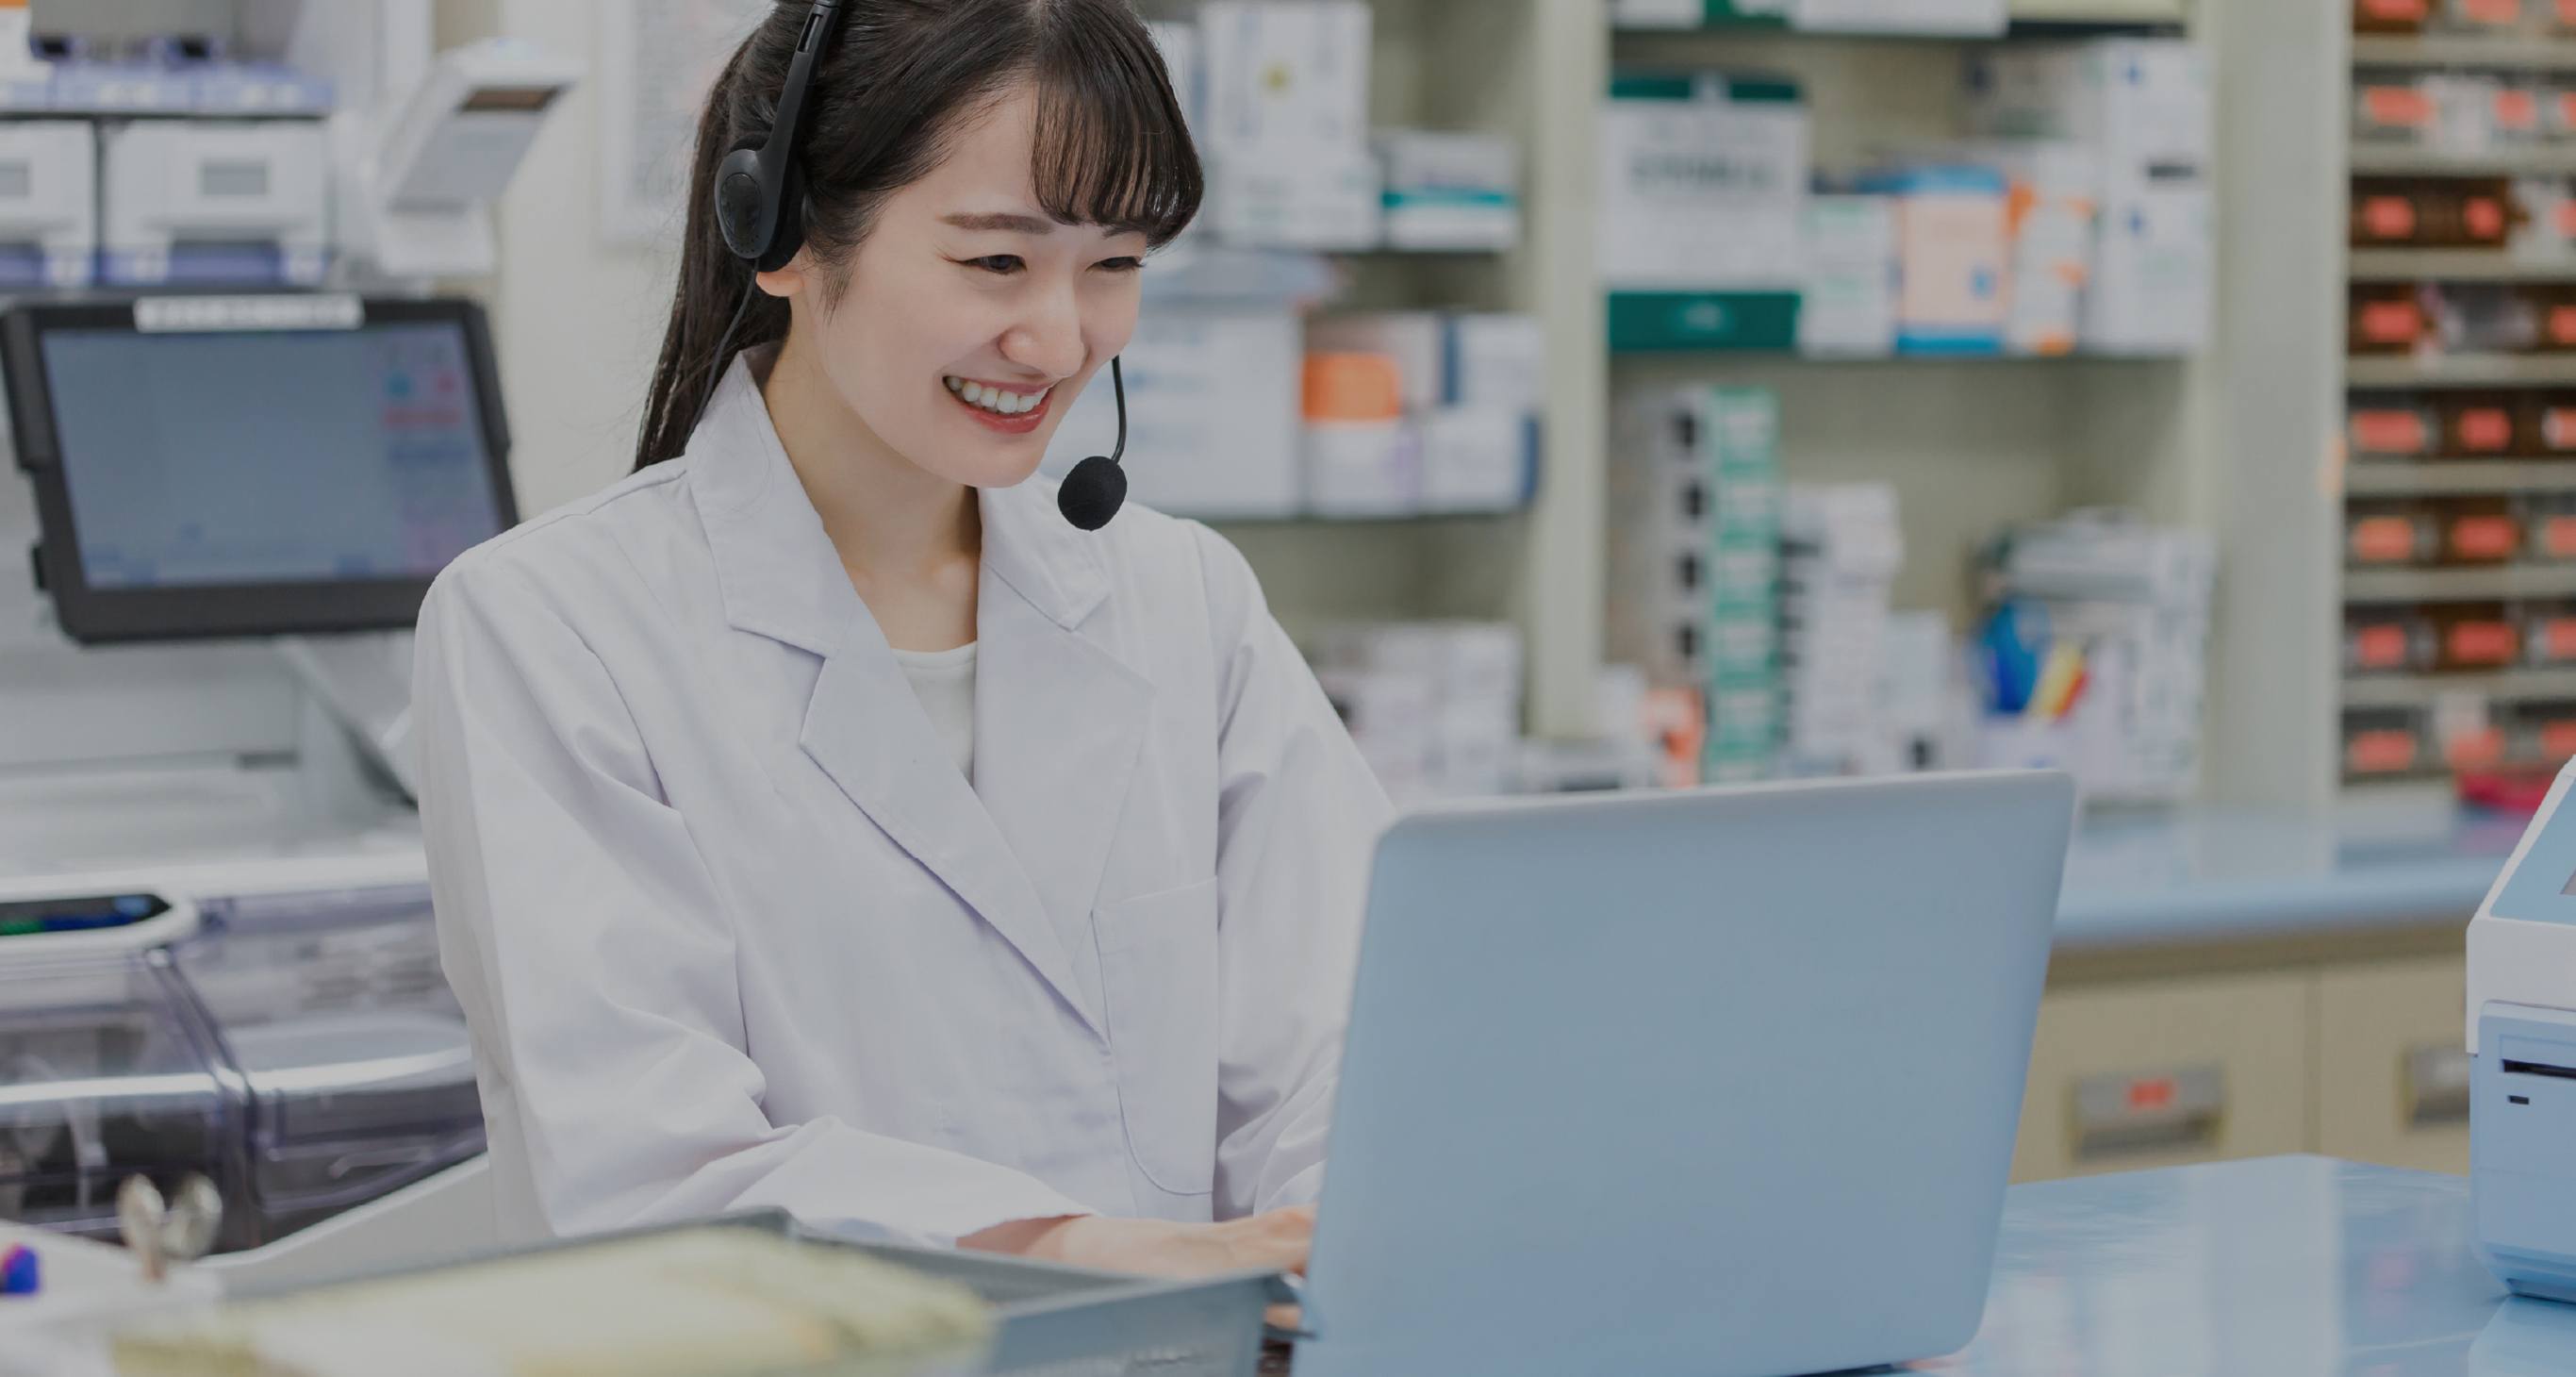 Pharmacies enter a new stage 薬局は、新たなステージへ。